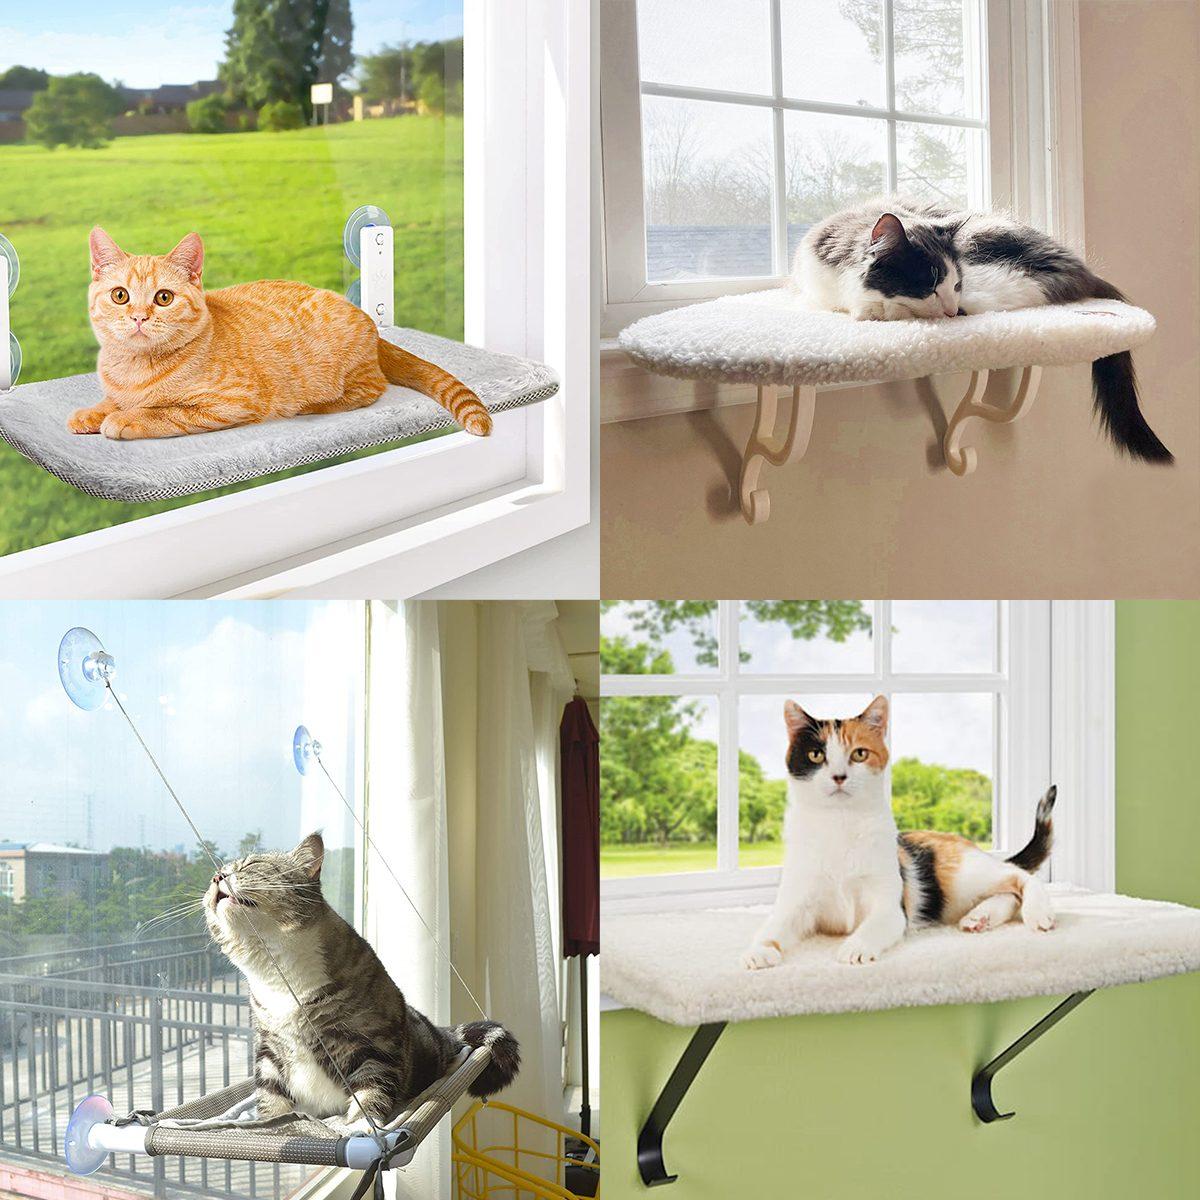 6 Best Cat Window Perches for Kitty to (Safely) Sunbathe and Birdwatch